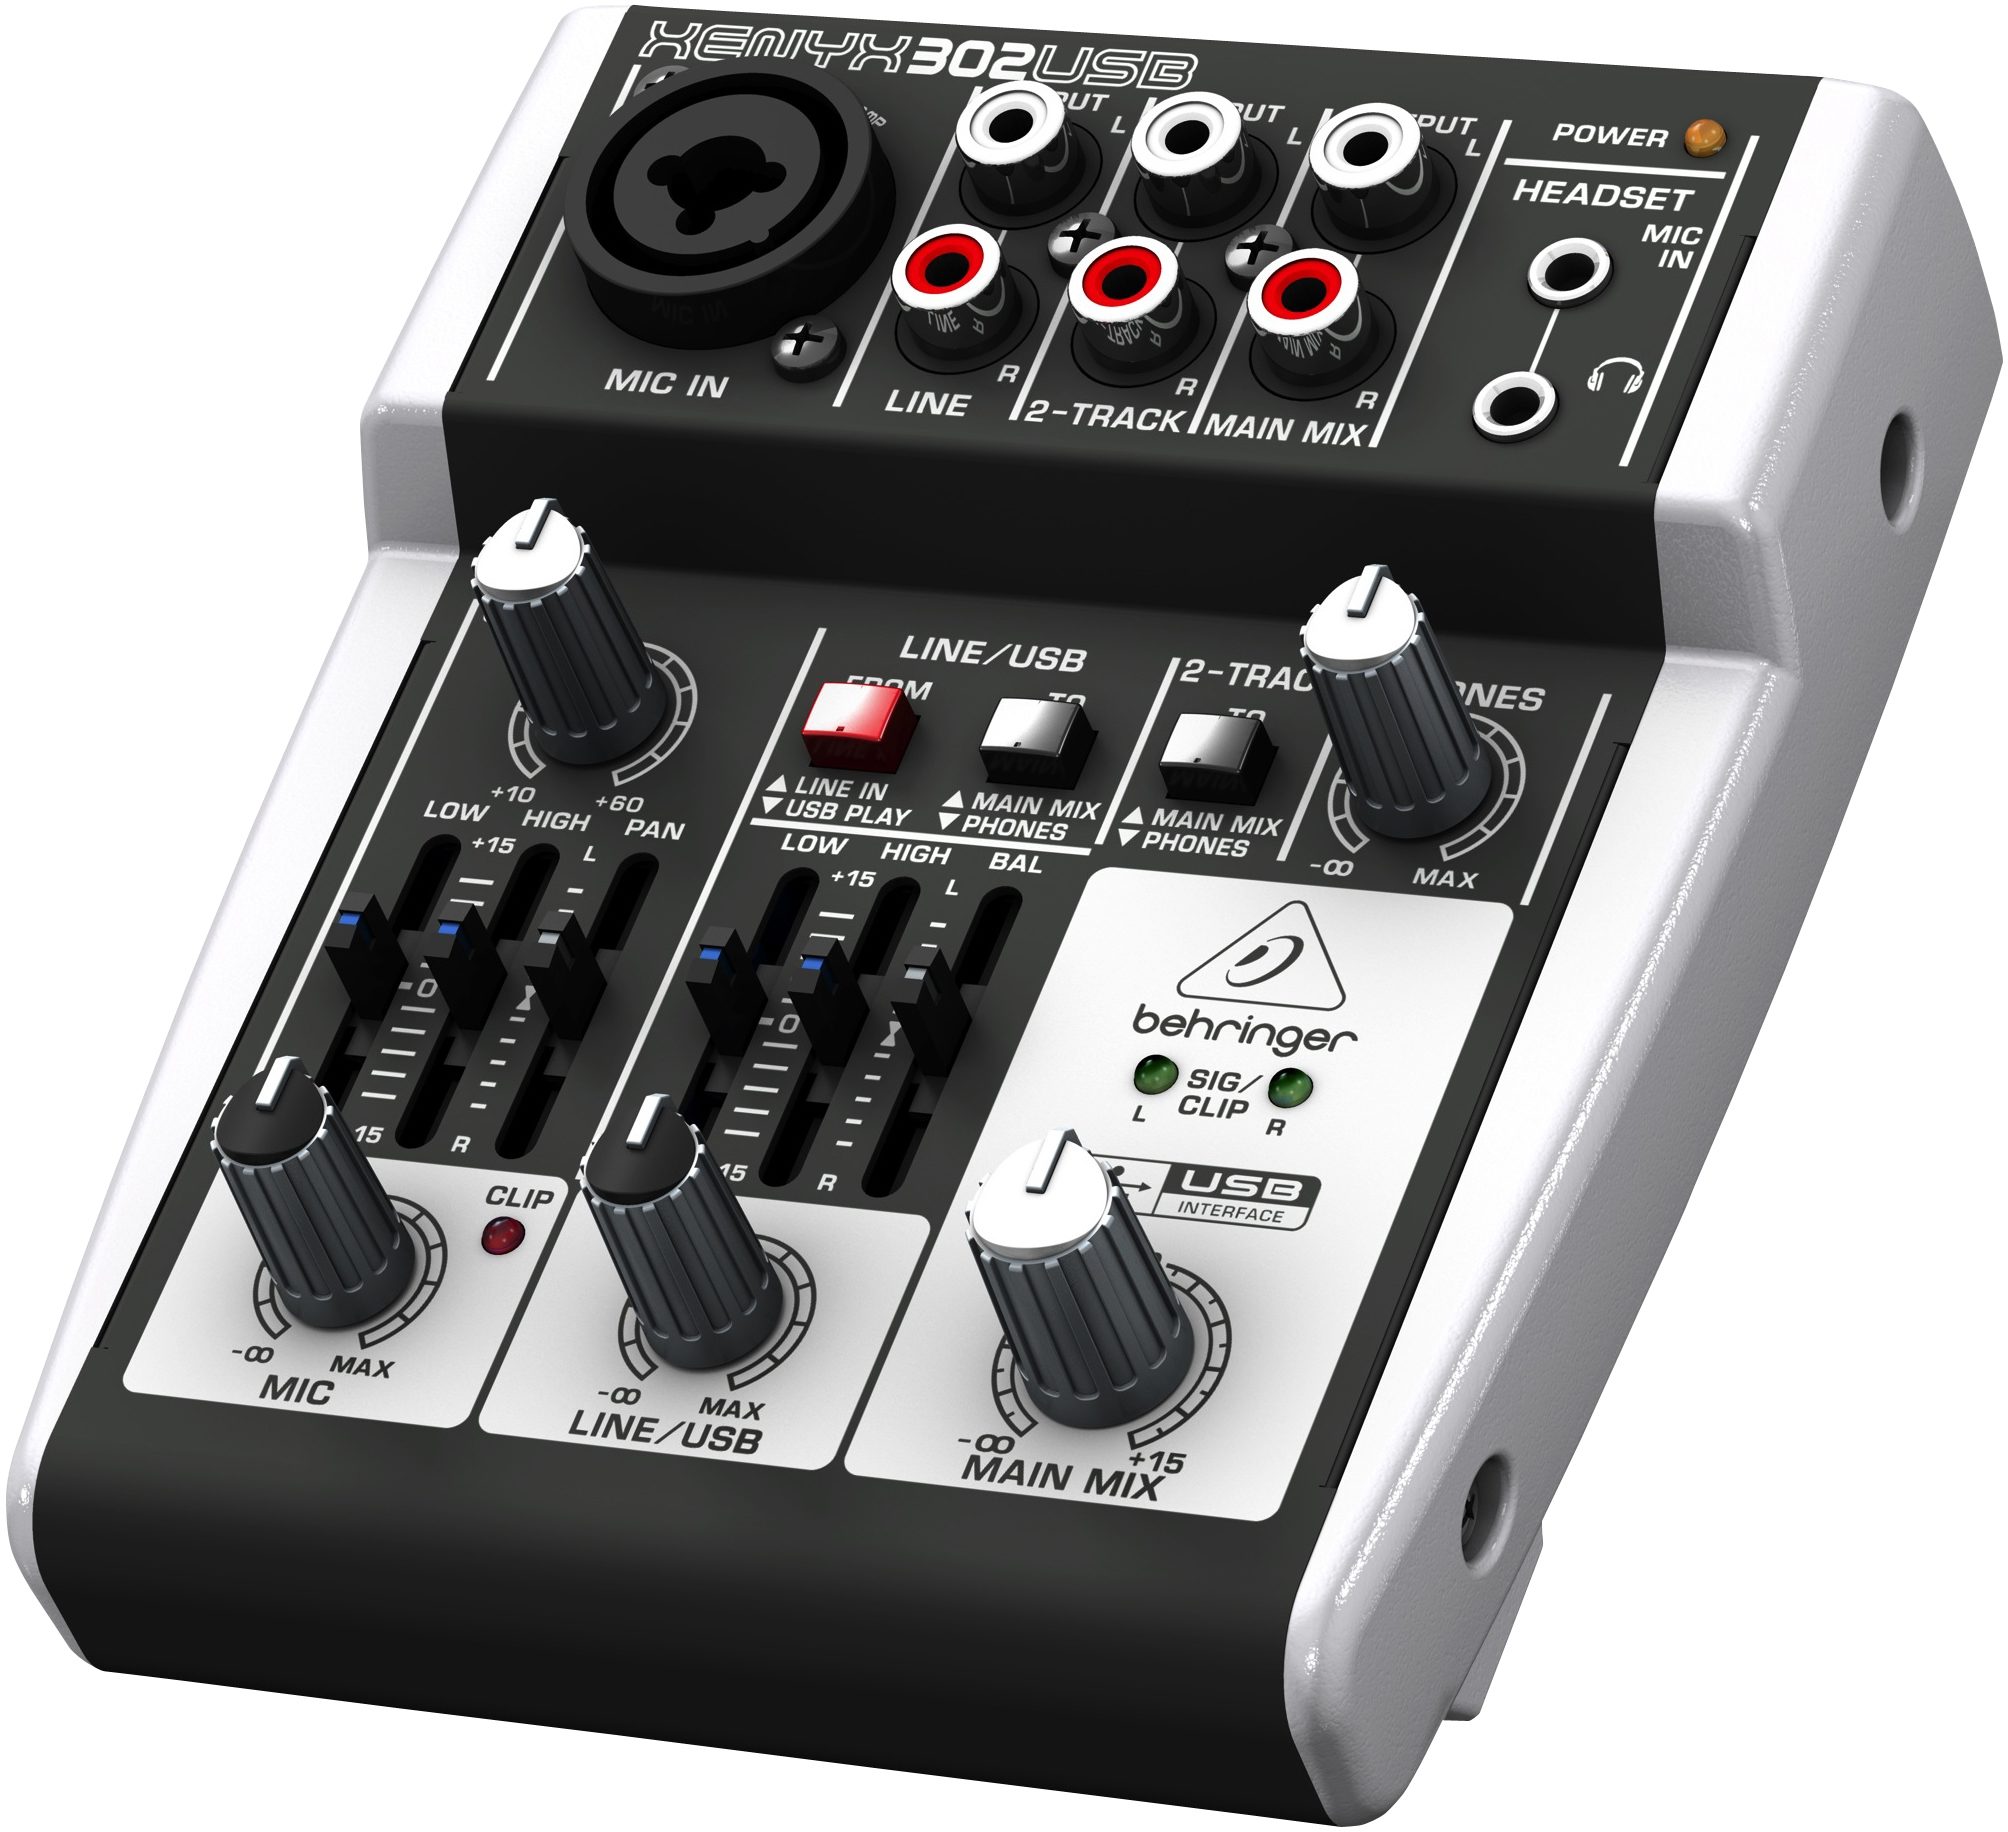 Cuaderno pintar Hacer Behringer 302USB USB Audio Mixer and Interface | zZounds